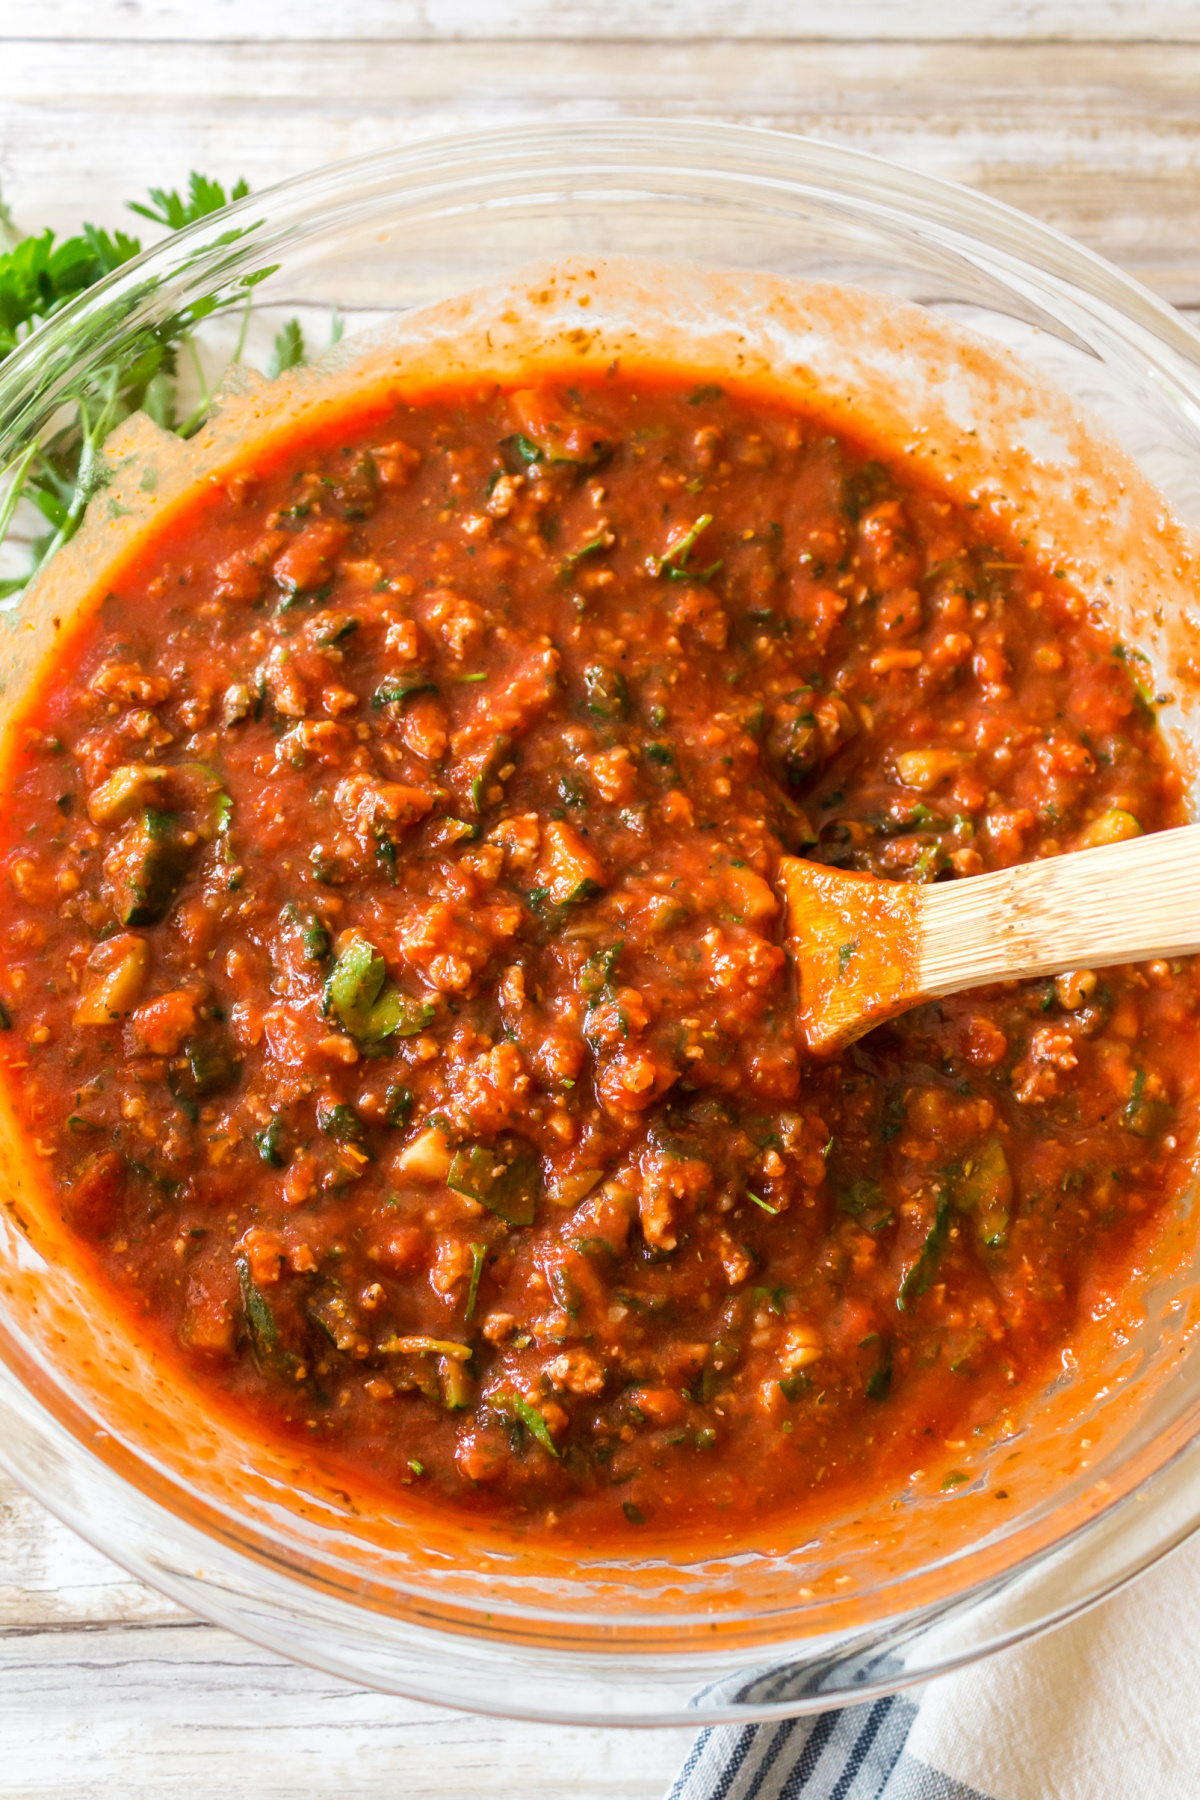 A bowl of homemade marinara sauce with a wooden spoon.